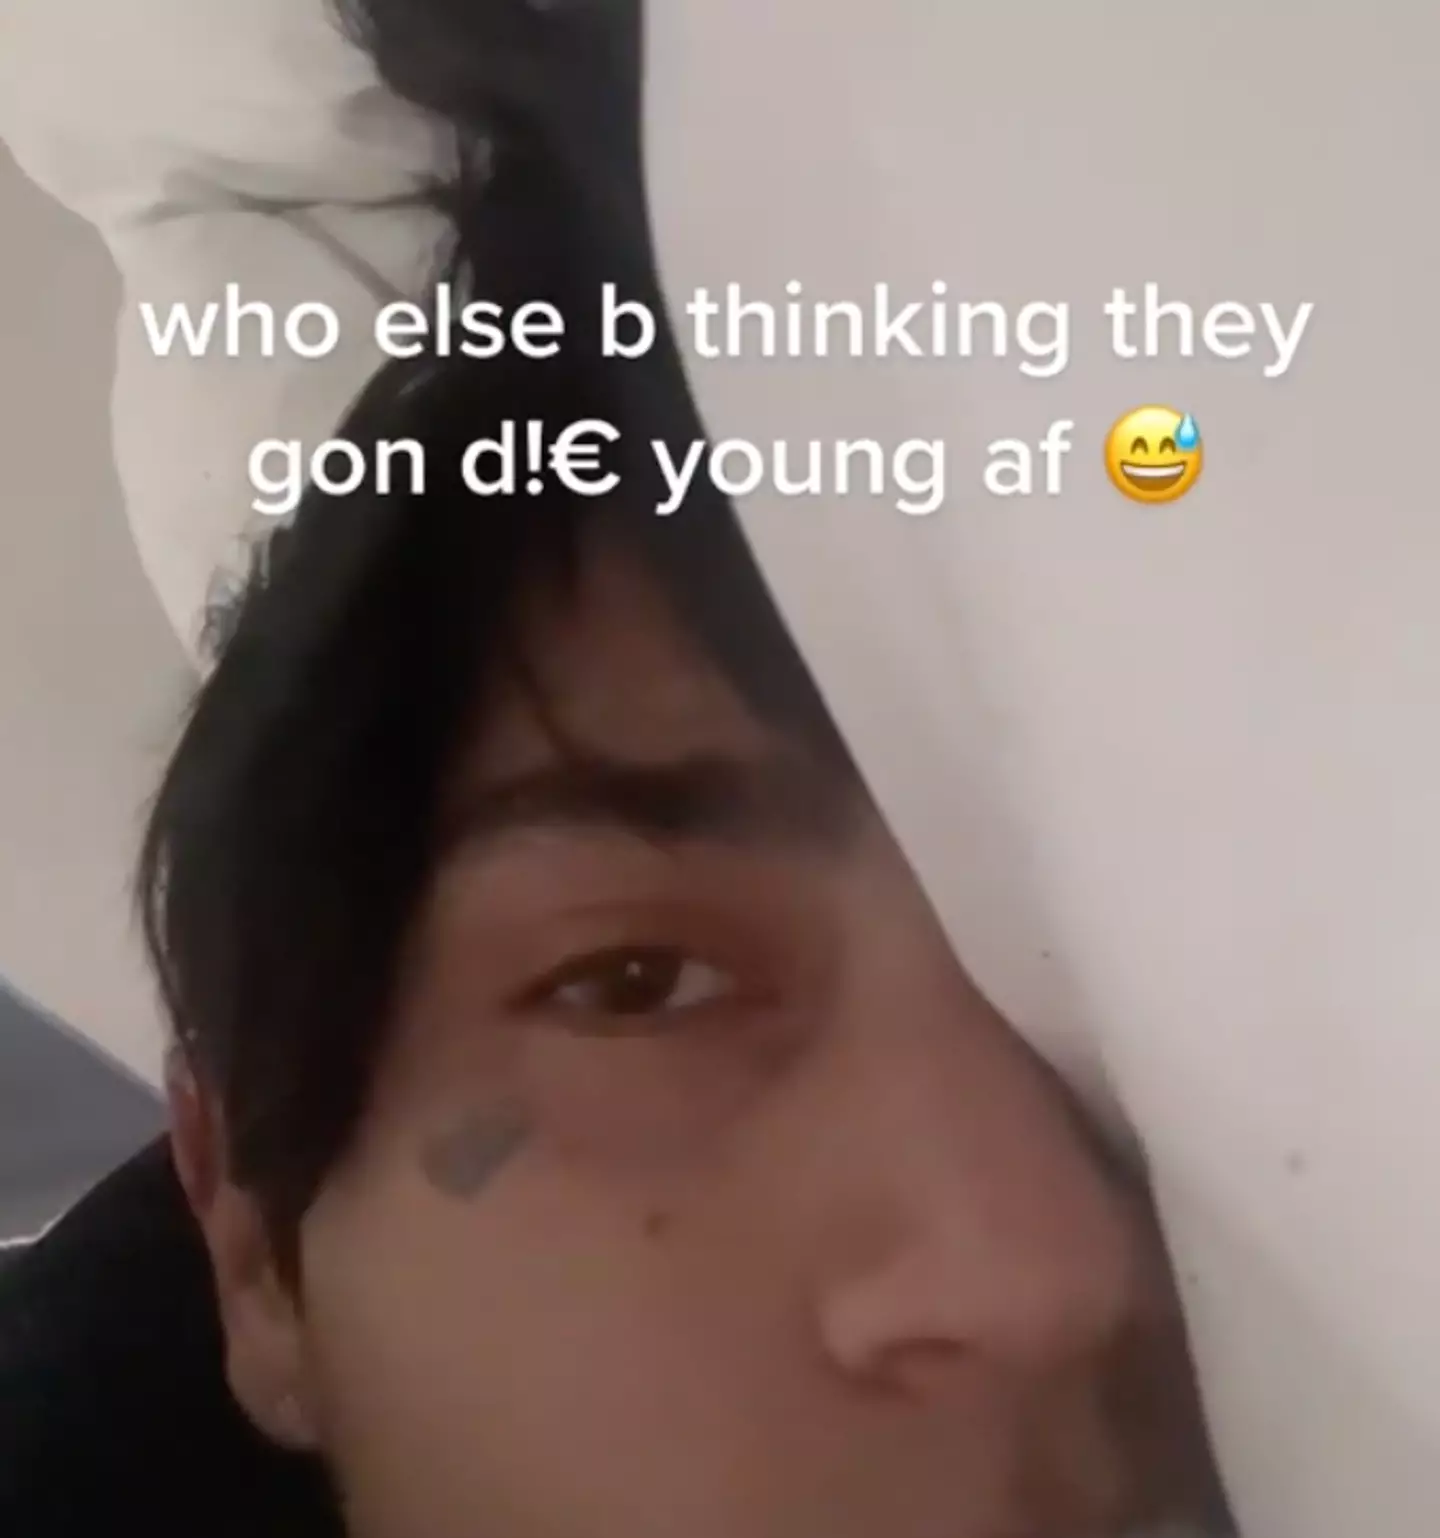 Cooper had recently posted a video about dying young.